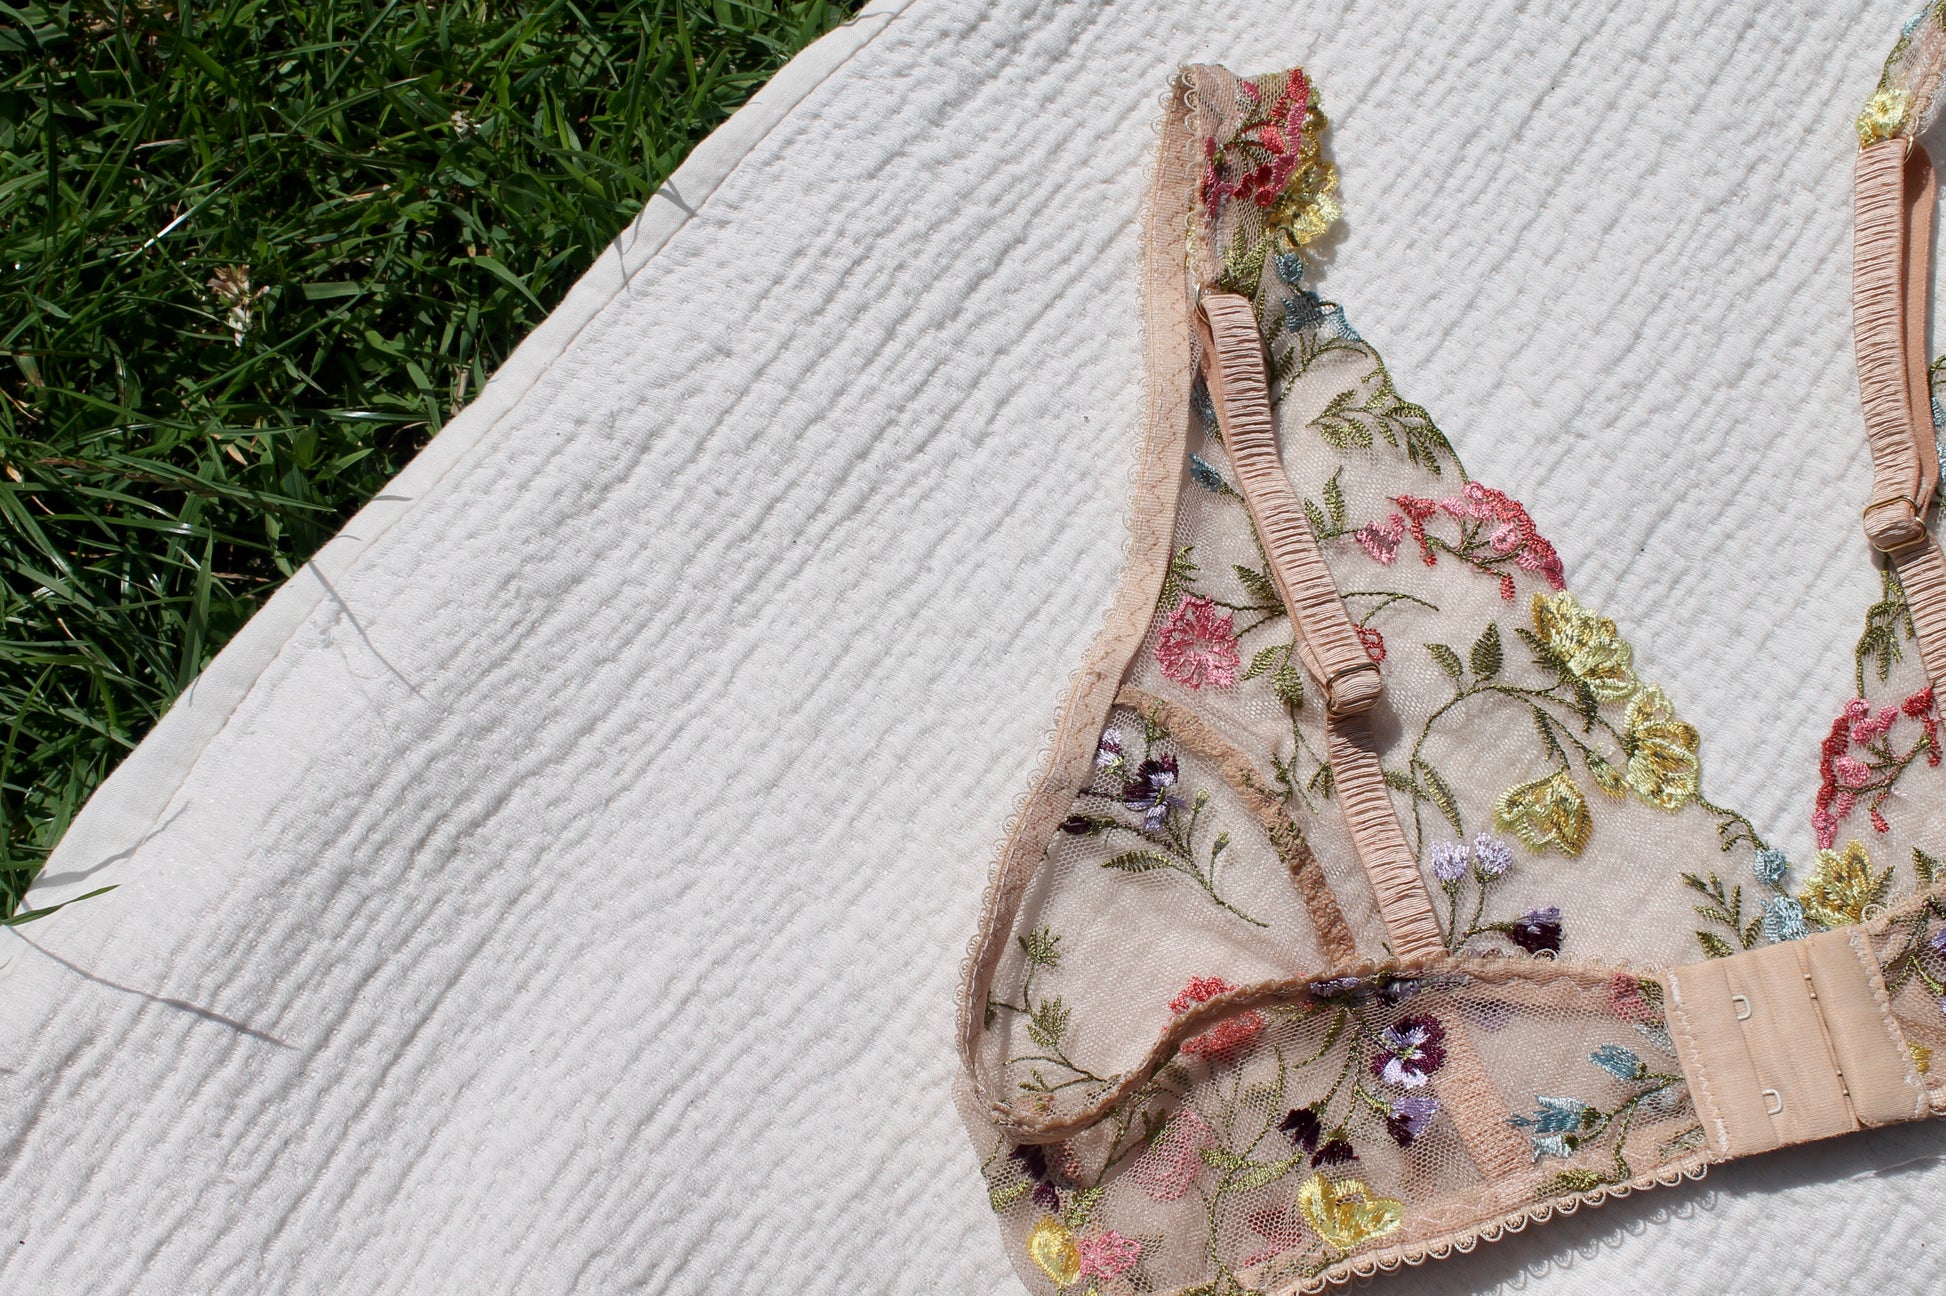 Back view close up of embroidered floral lace bralette